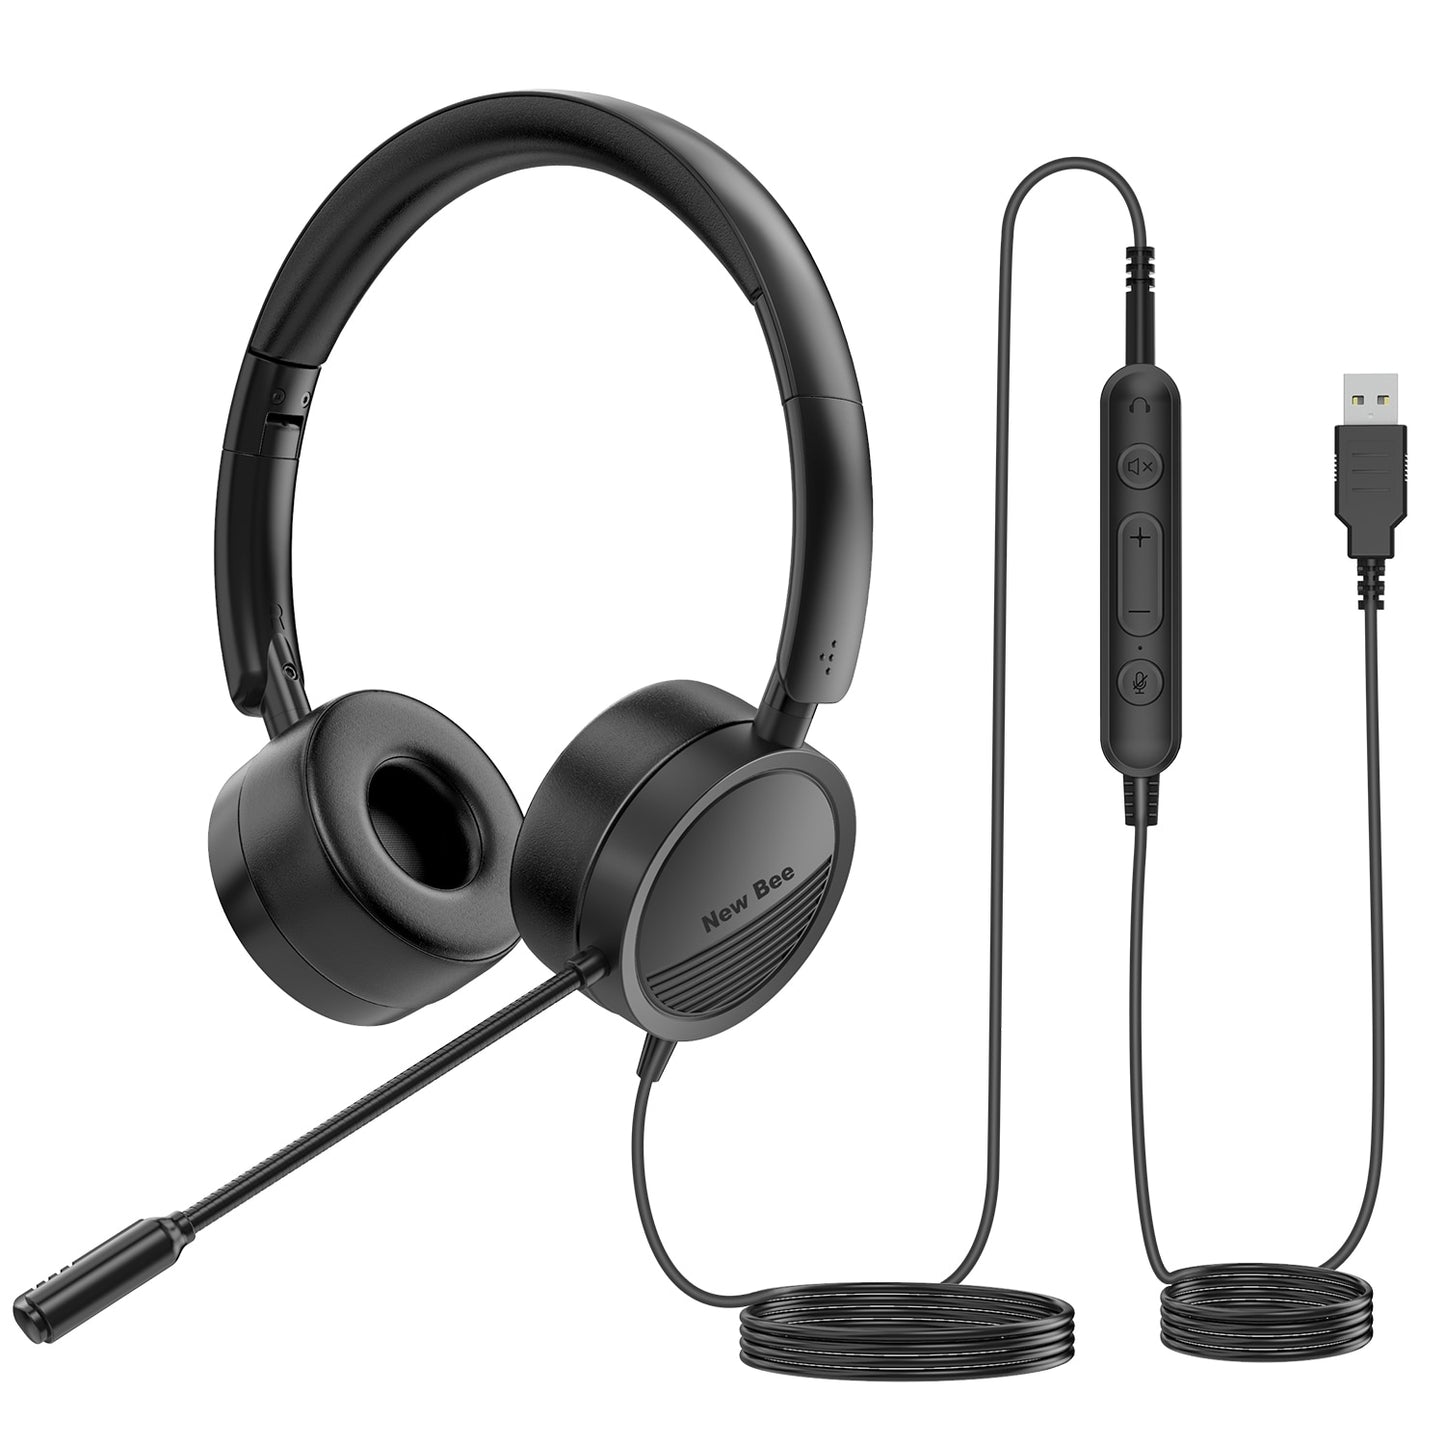 New Bee USB Headset with Microphone for PC 3.5mm Business Headsets with Mic Mute Noise Cancelling for Call Center Headphones